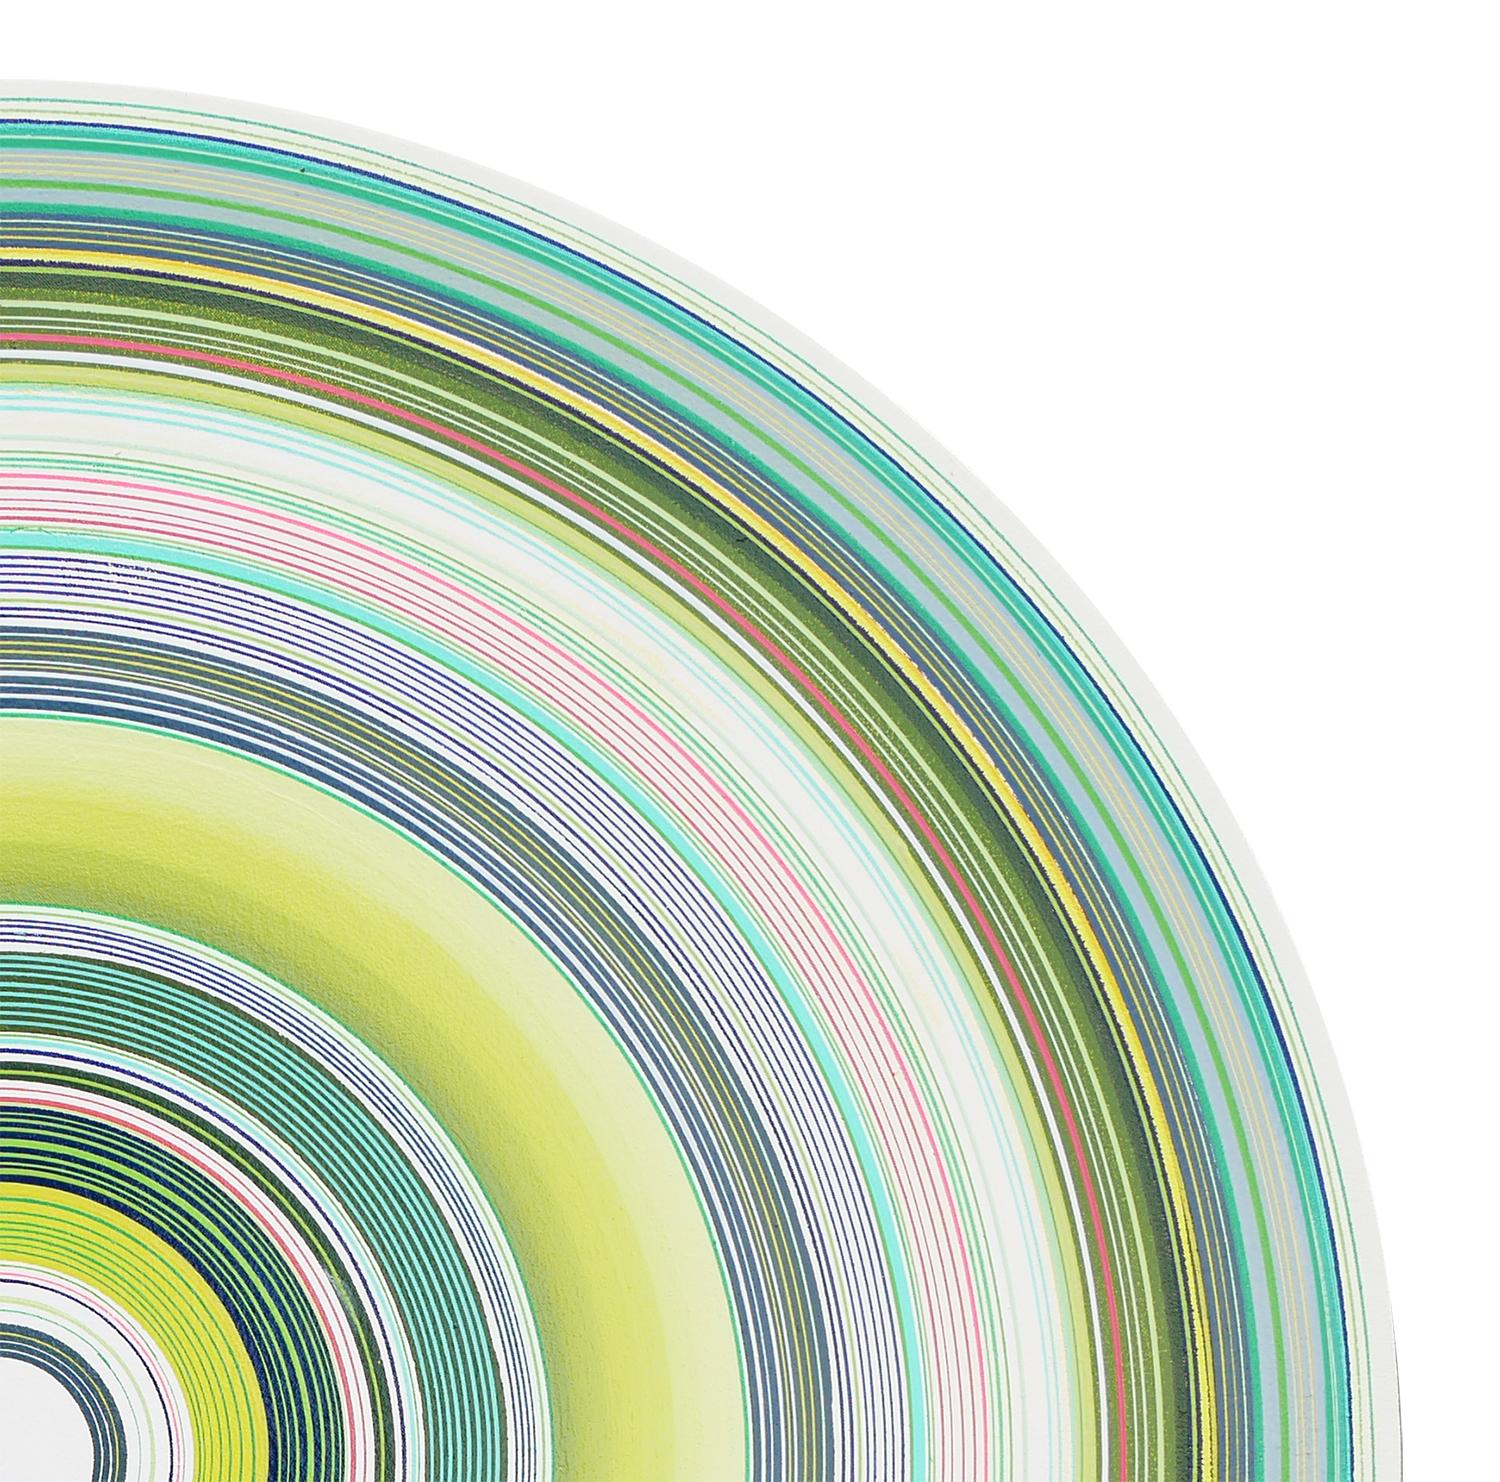 Colorful abstract contemporary circular painting by Houston, TX artist, David Hardaker. This painting features various rings of light green, blue, and light pink with a gold lining around the edge of the canvas. Signed and titled by the artist at